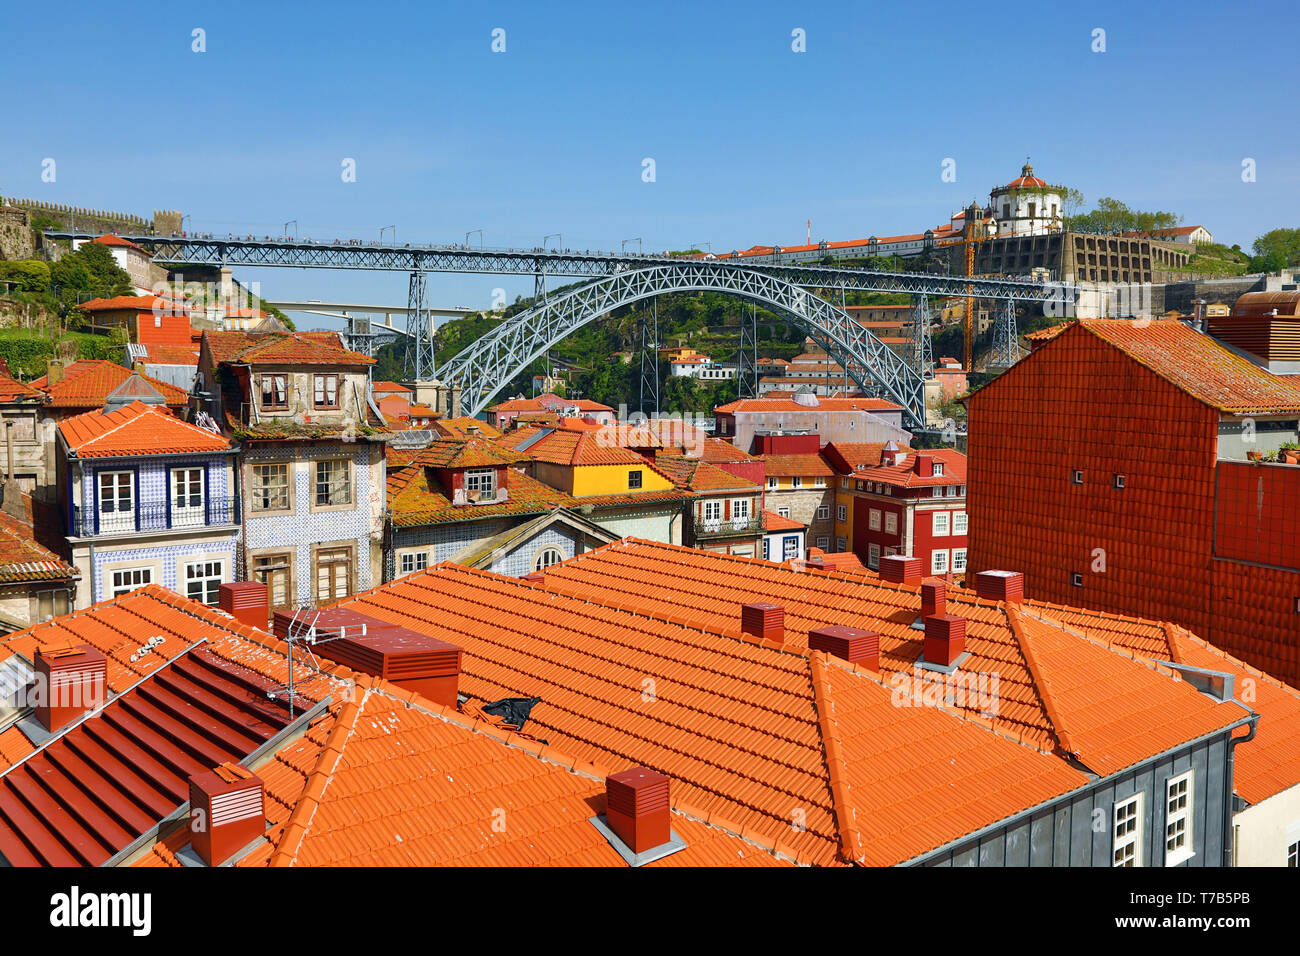 The Dom Luis I metal arch bridge and orange tiled roofs of Porto, Portugal Stock Photo